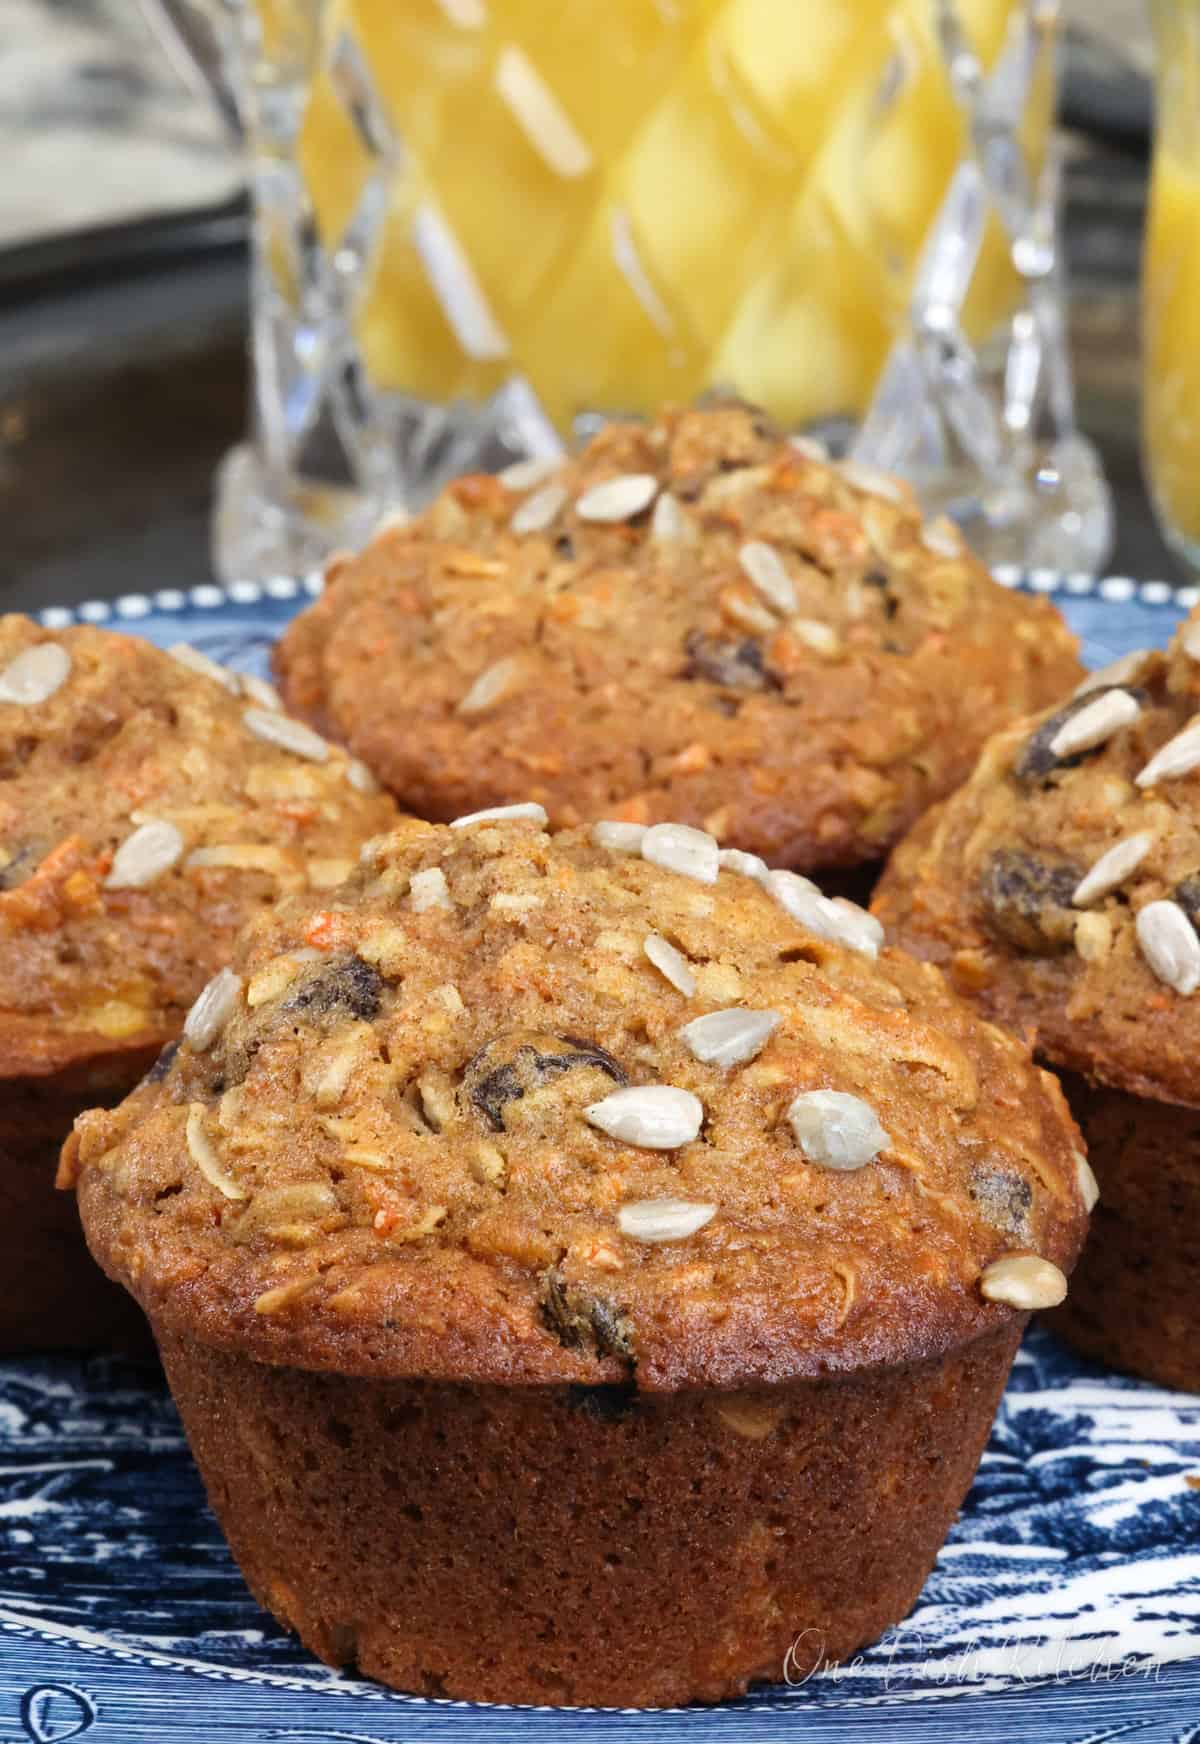 four morning glory muffins on a blue plate next to a pitcher of orange juice.